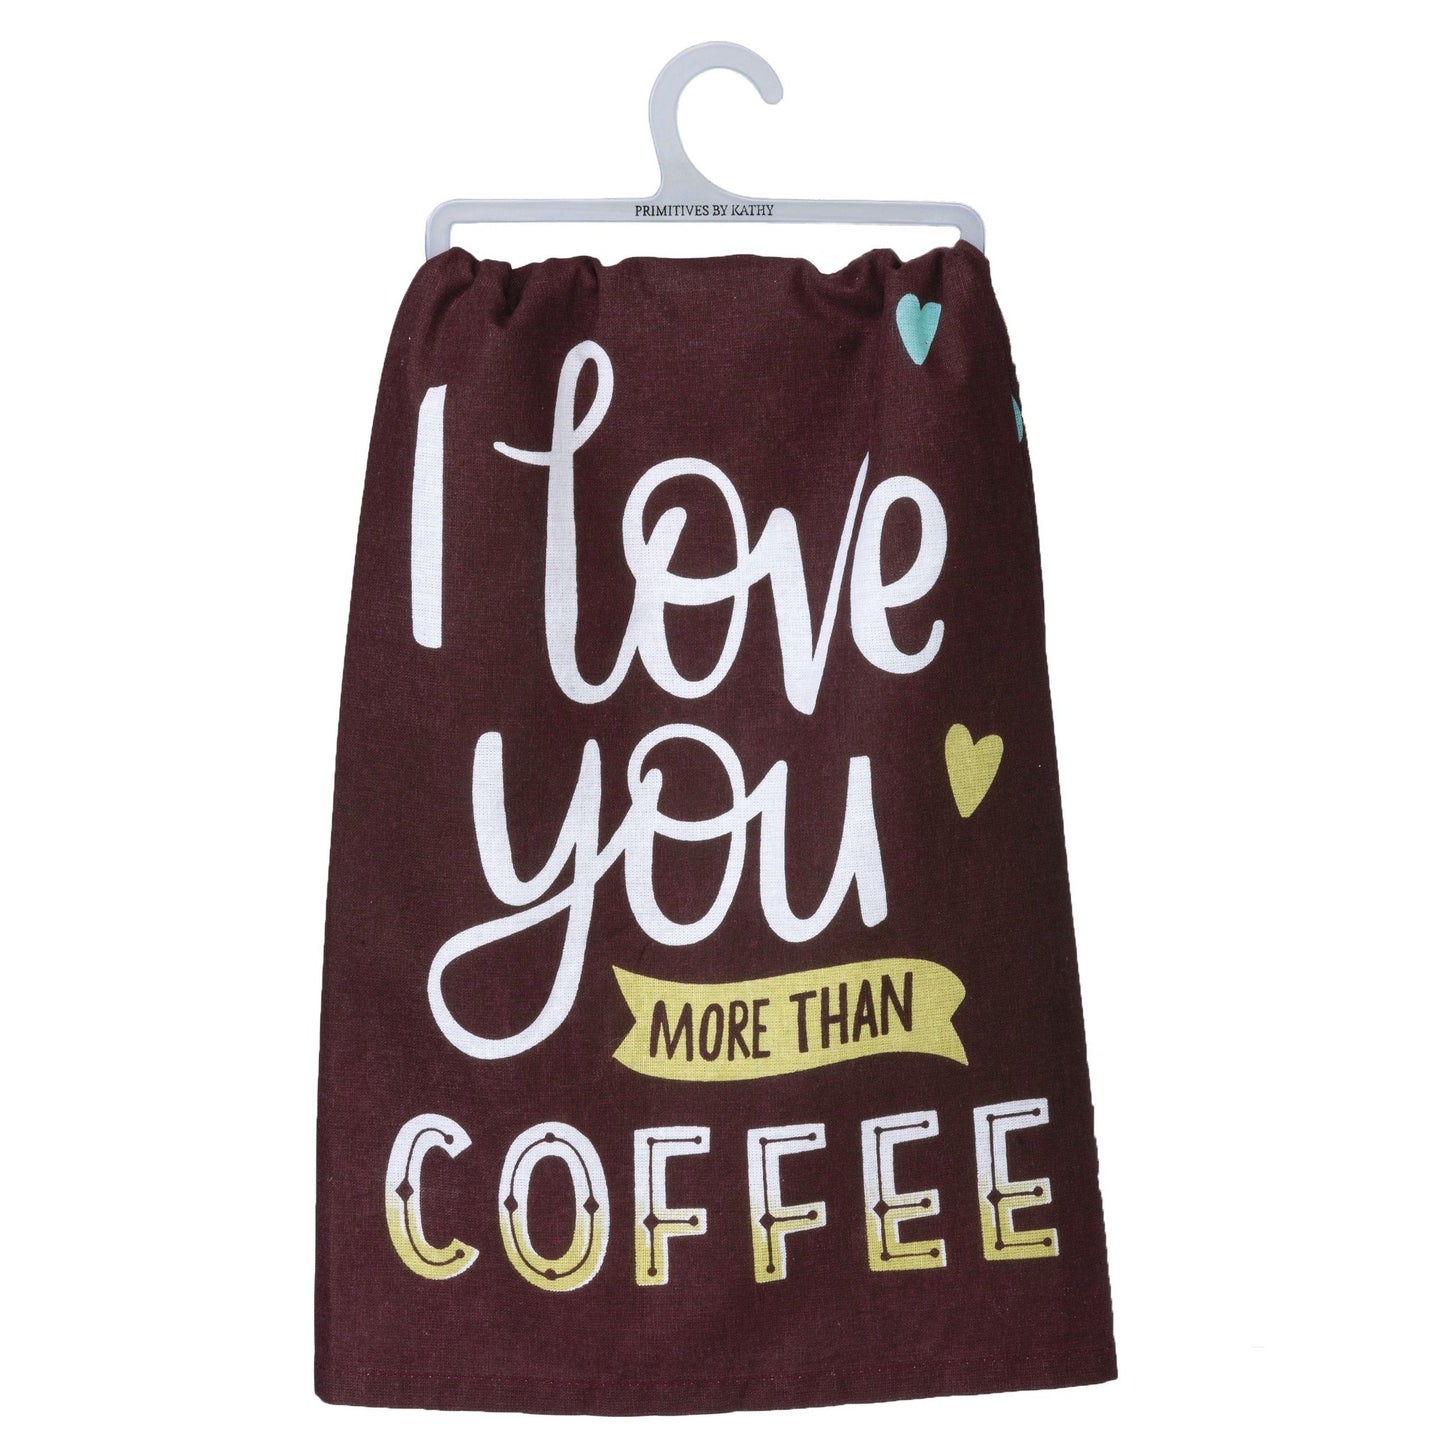 I Love You More Than Coffee Dish Cloth Towel | Novelty Silly Tea Towels | Hilarious Kitchen Hand Towel | 28" x 28"